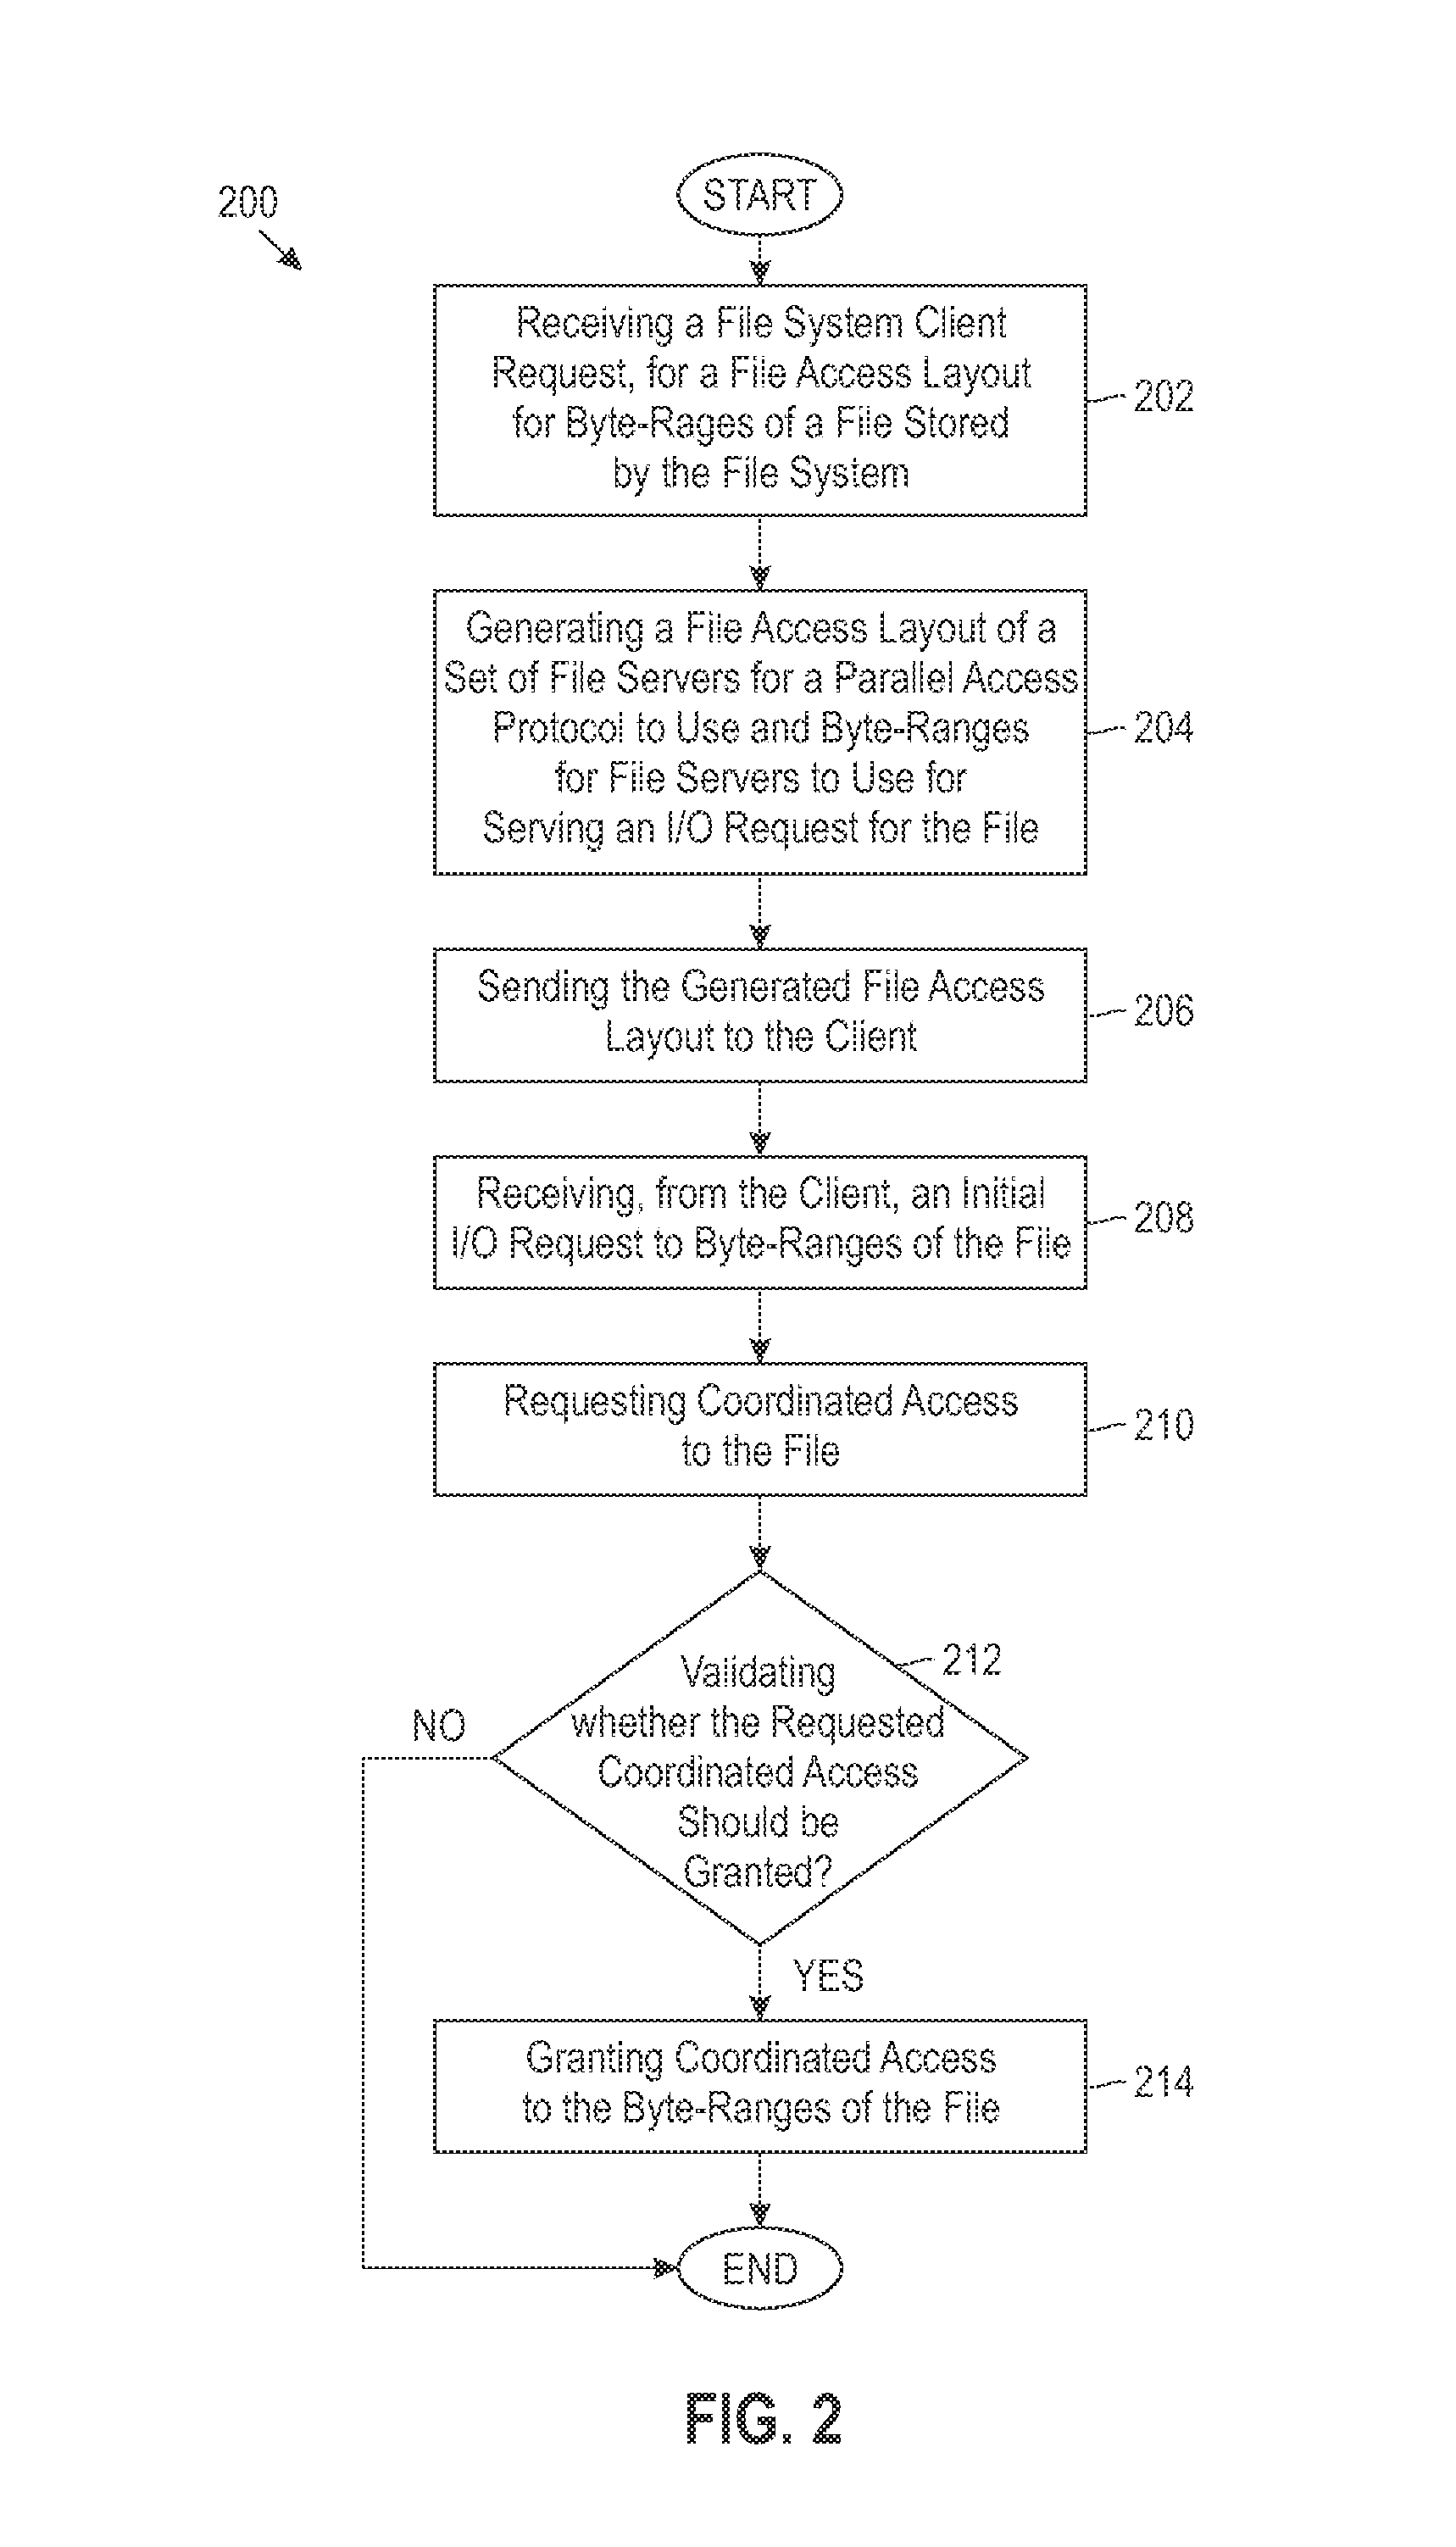 Coordinated access to a clustered file system's shared storage using shared-lock architecture